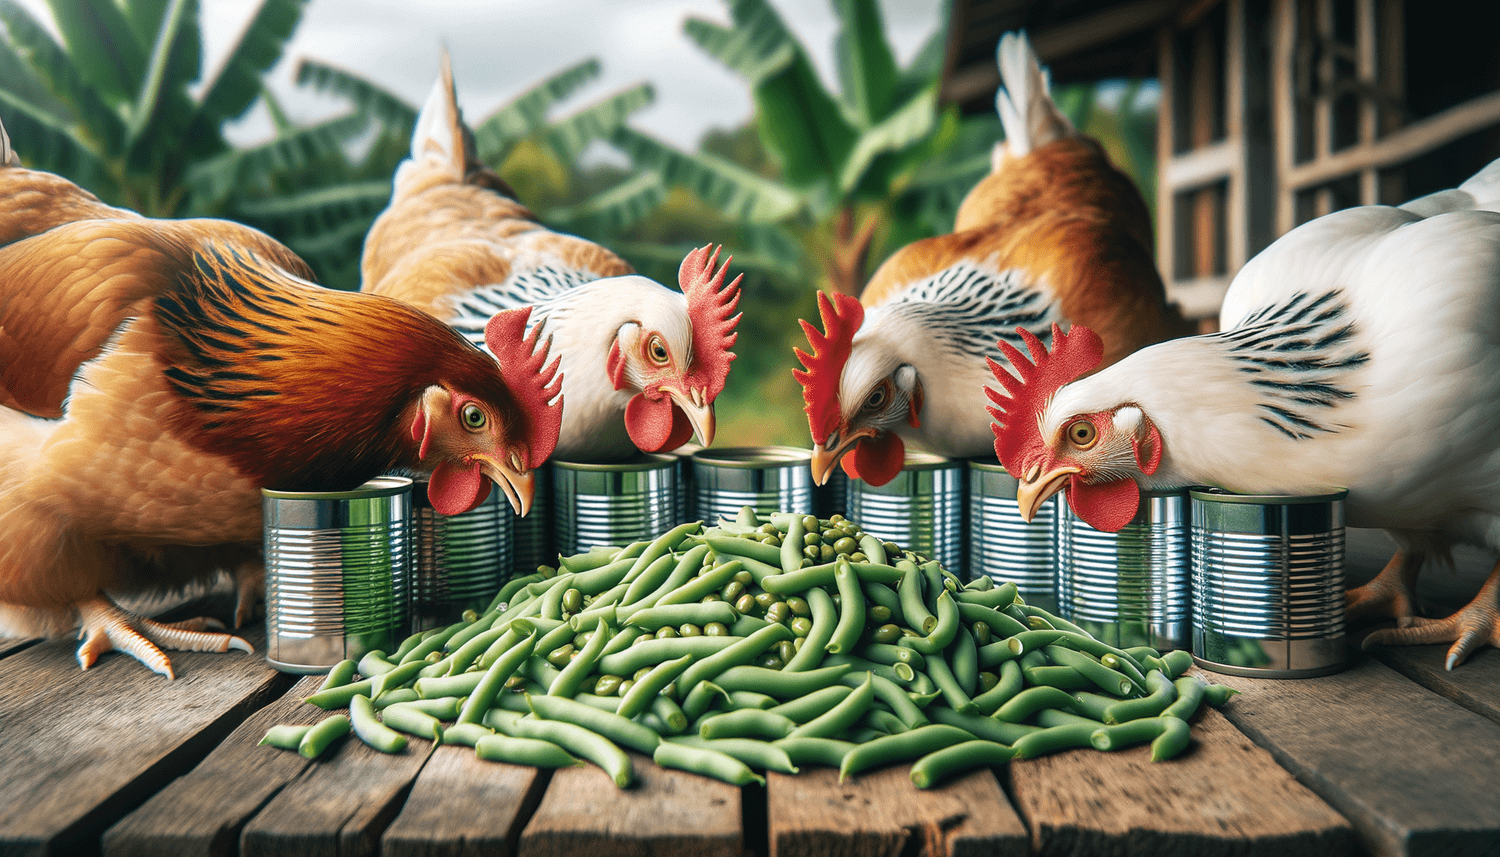 Can Chickens Eat Canned Green Beans?